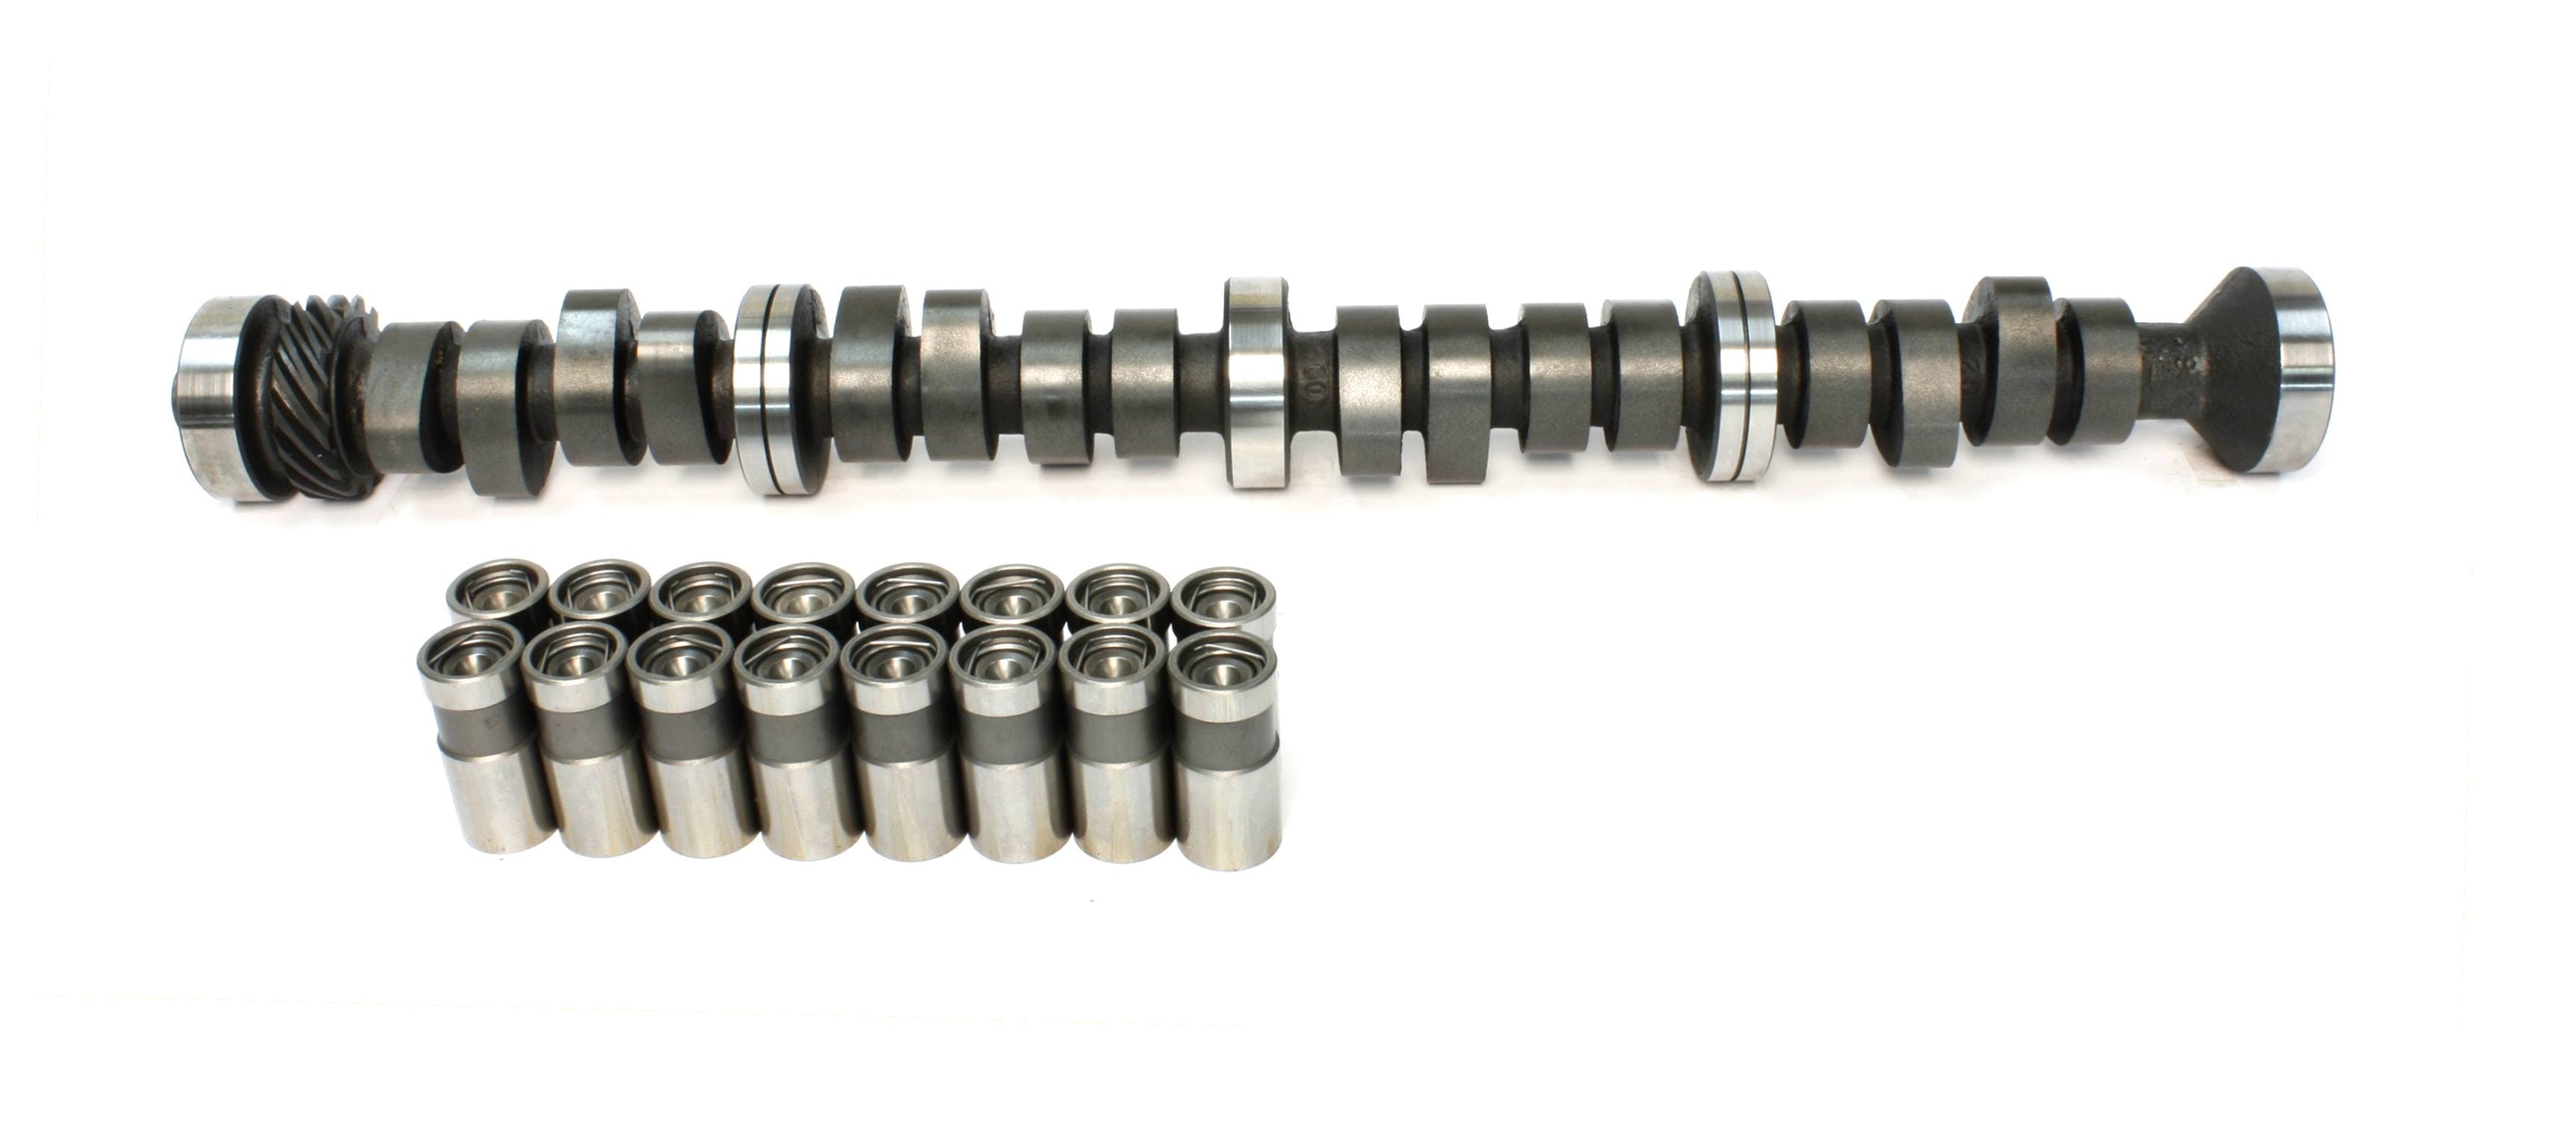 Competition Cams CL33-230-4 Magnum Camshaft/Lifter Kit